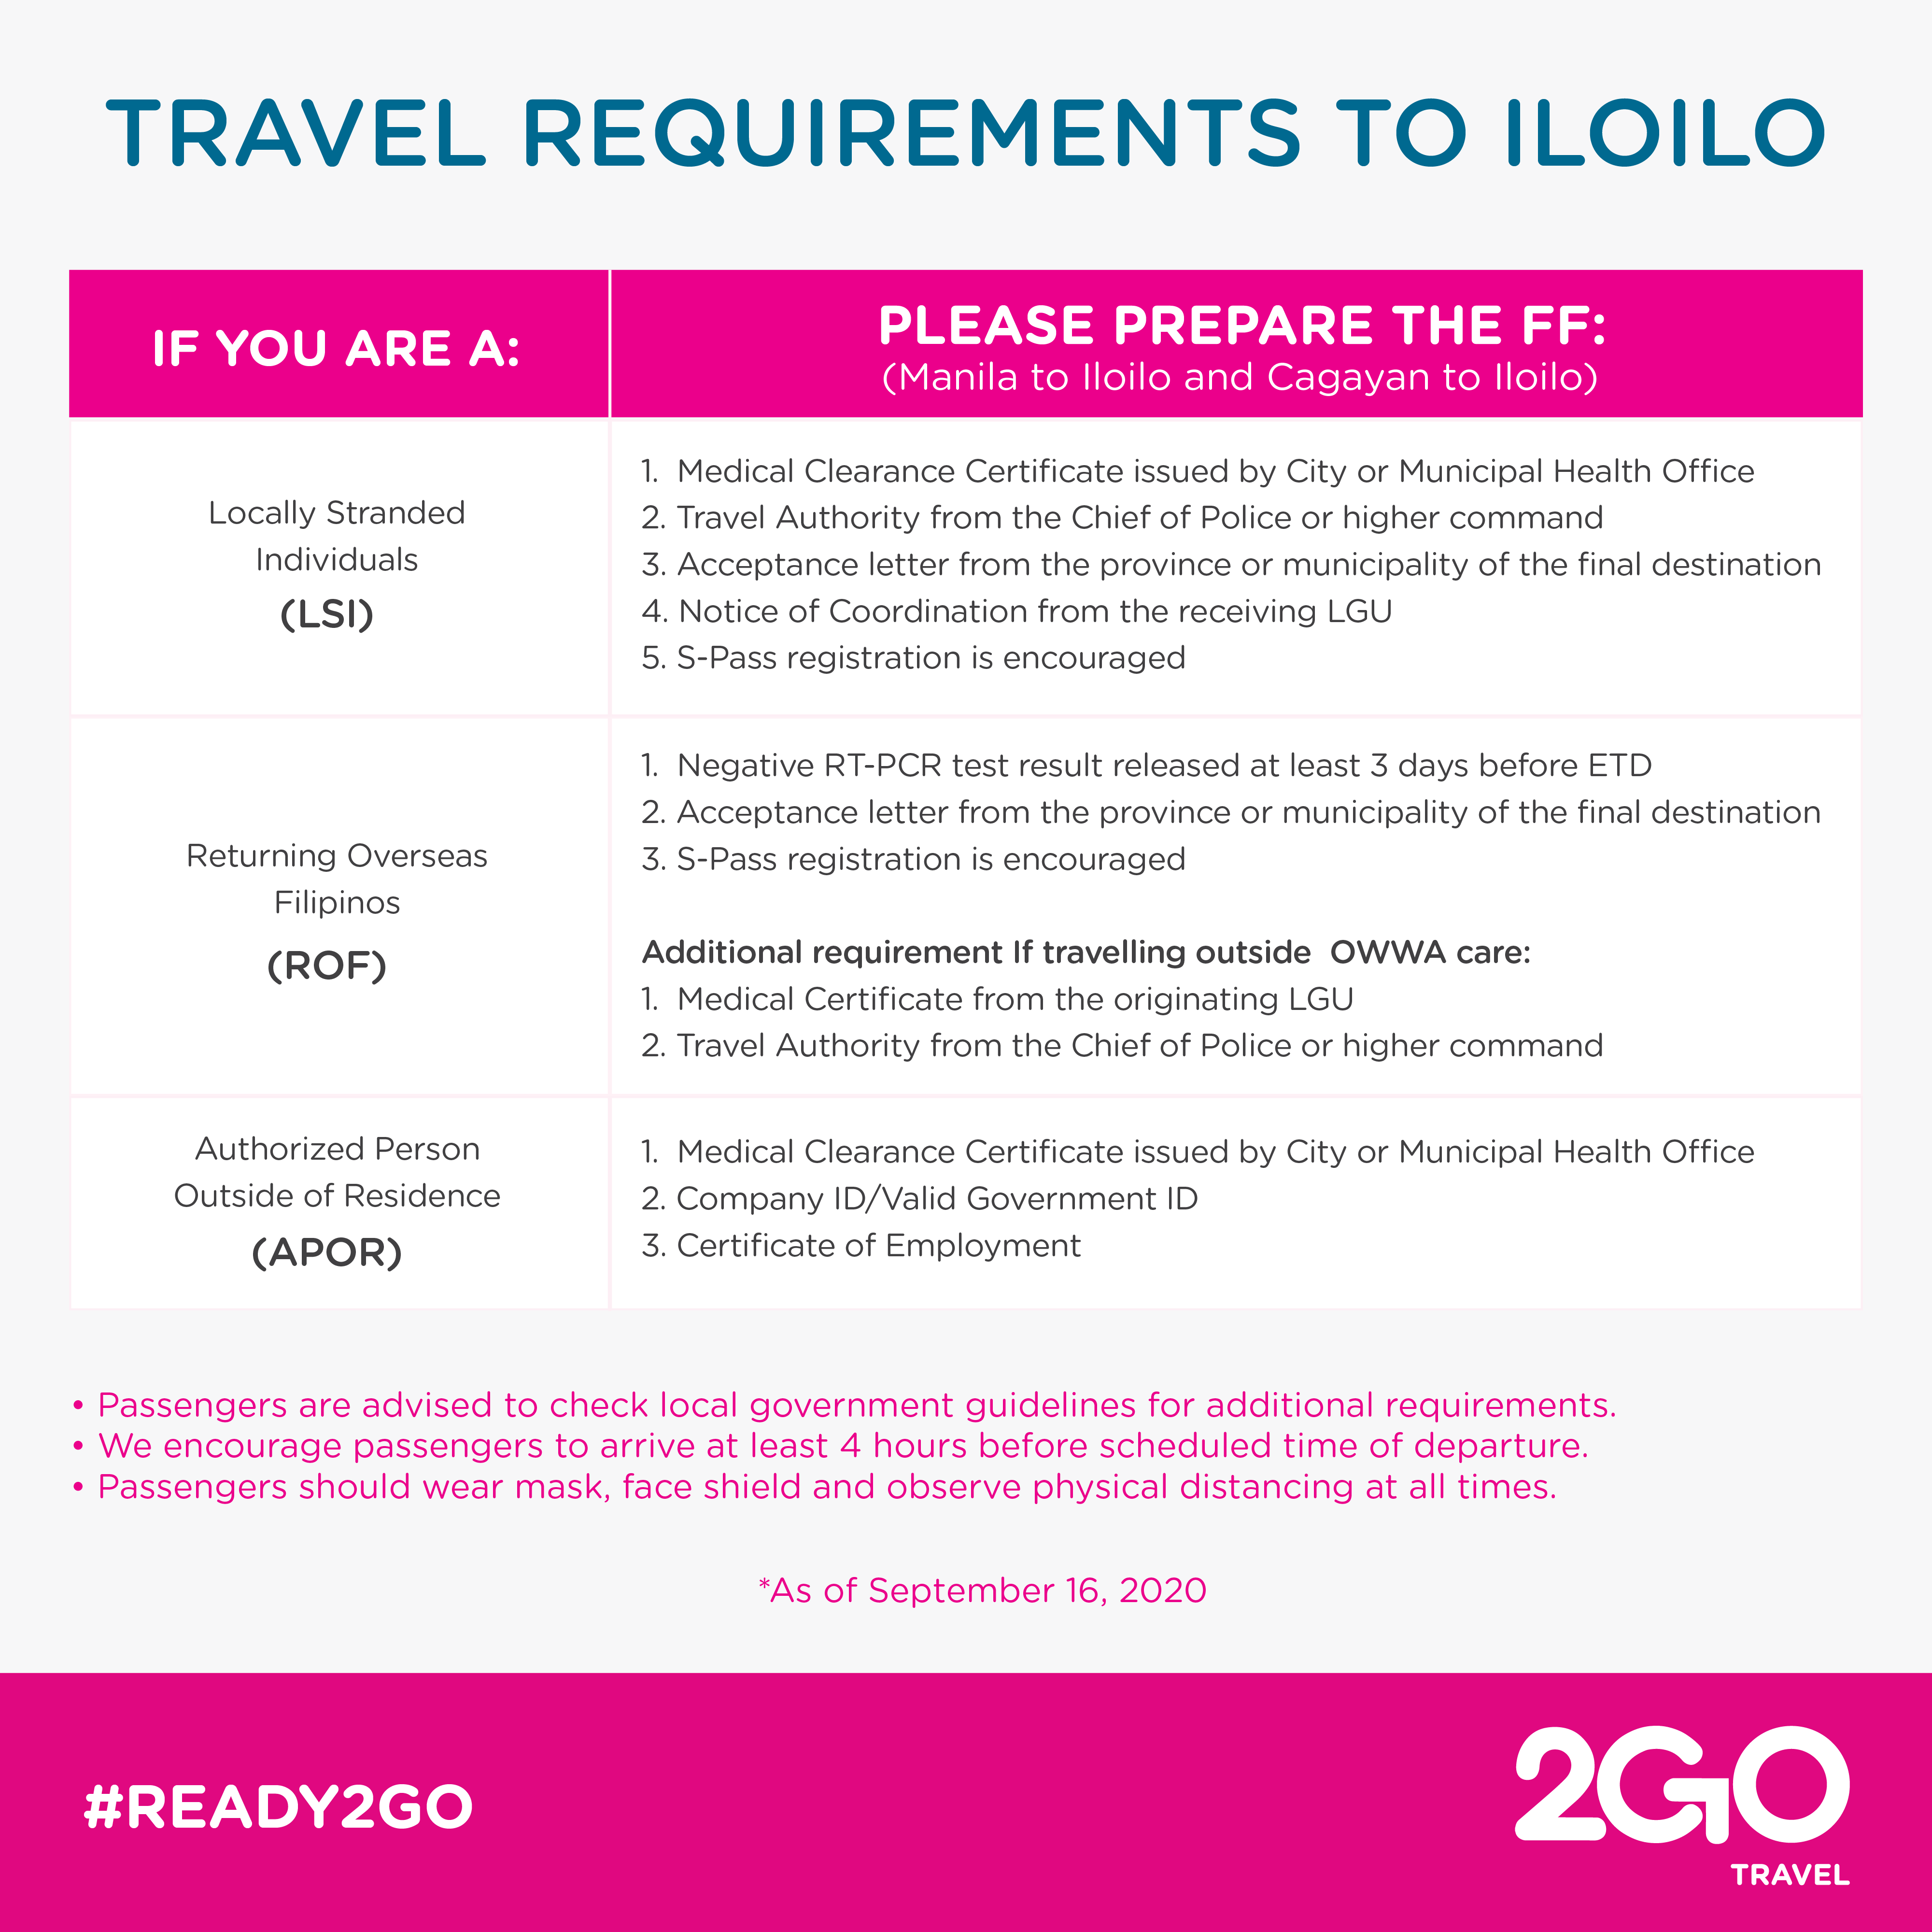 Travel Guidelines